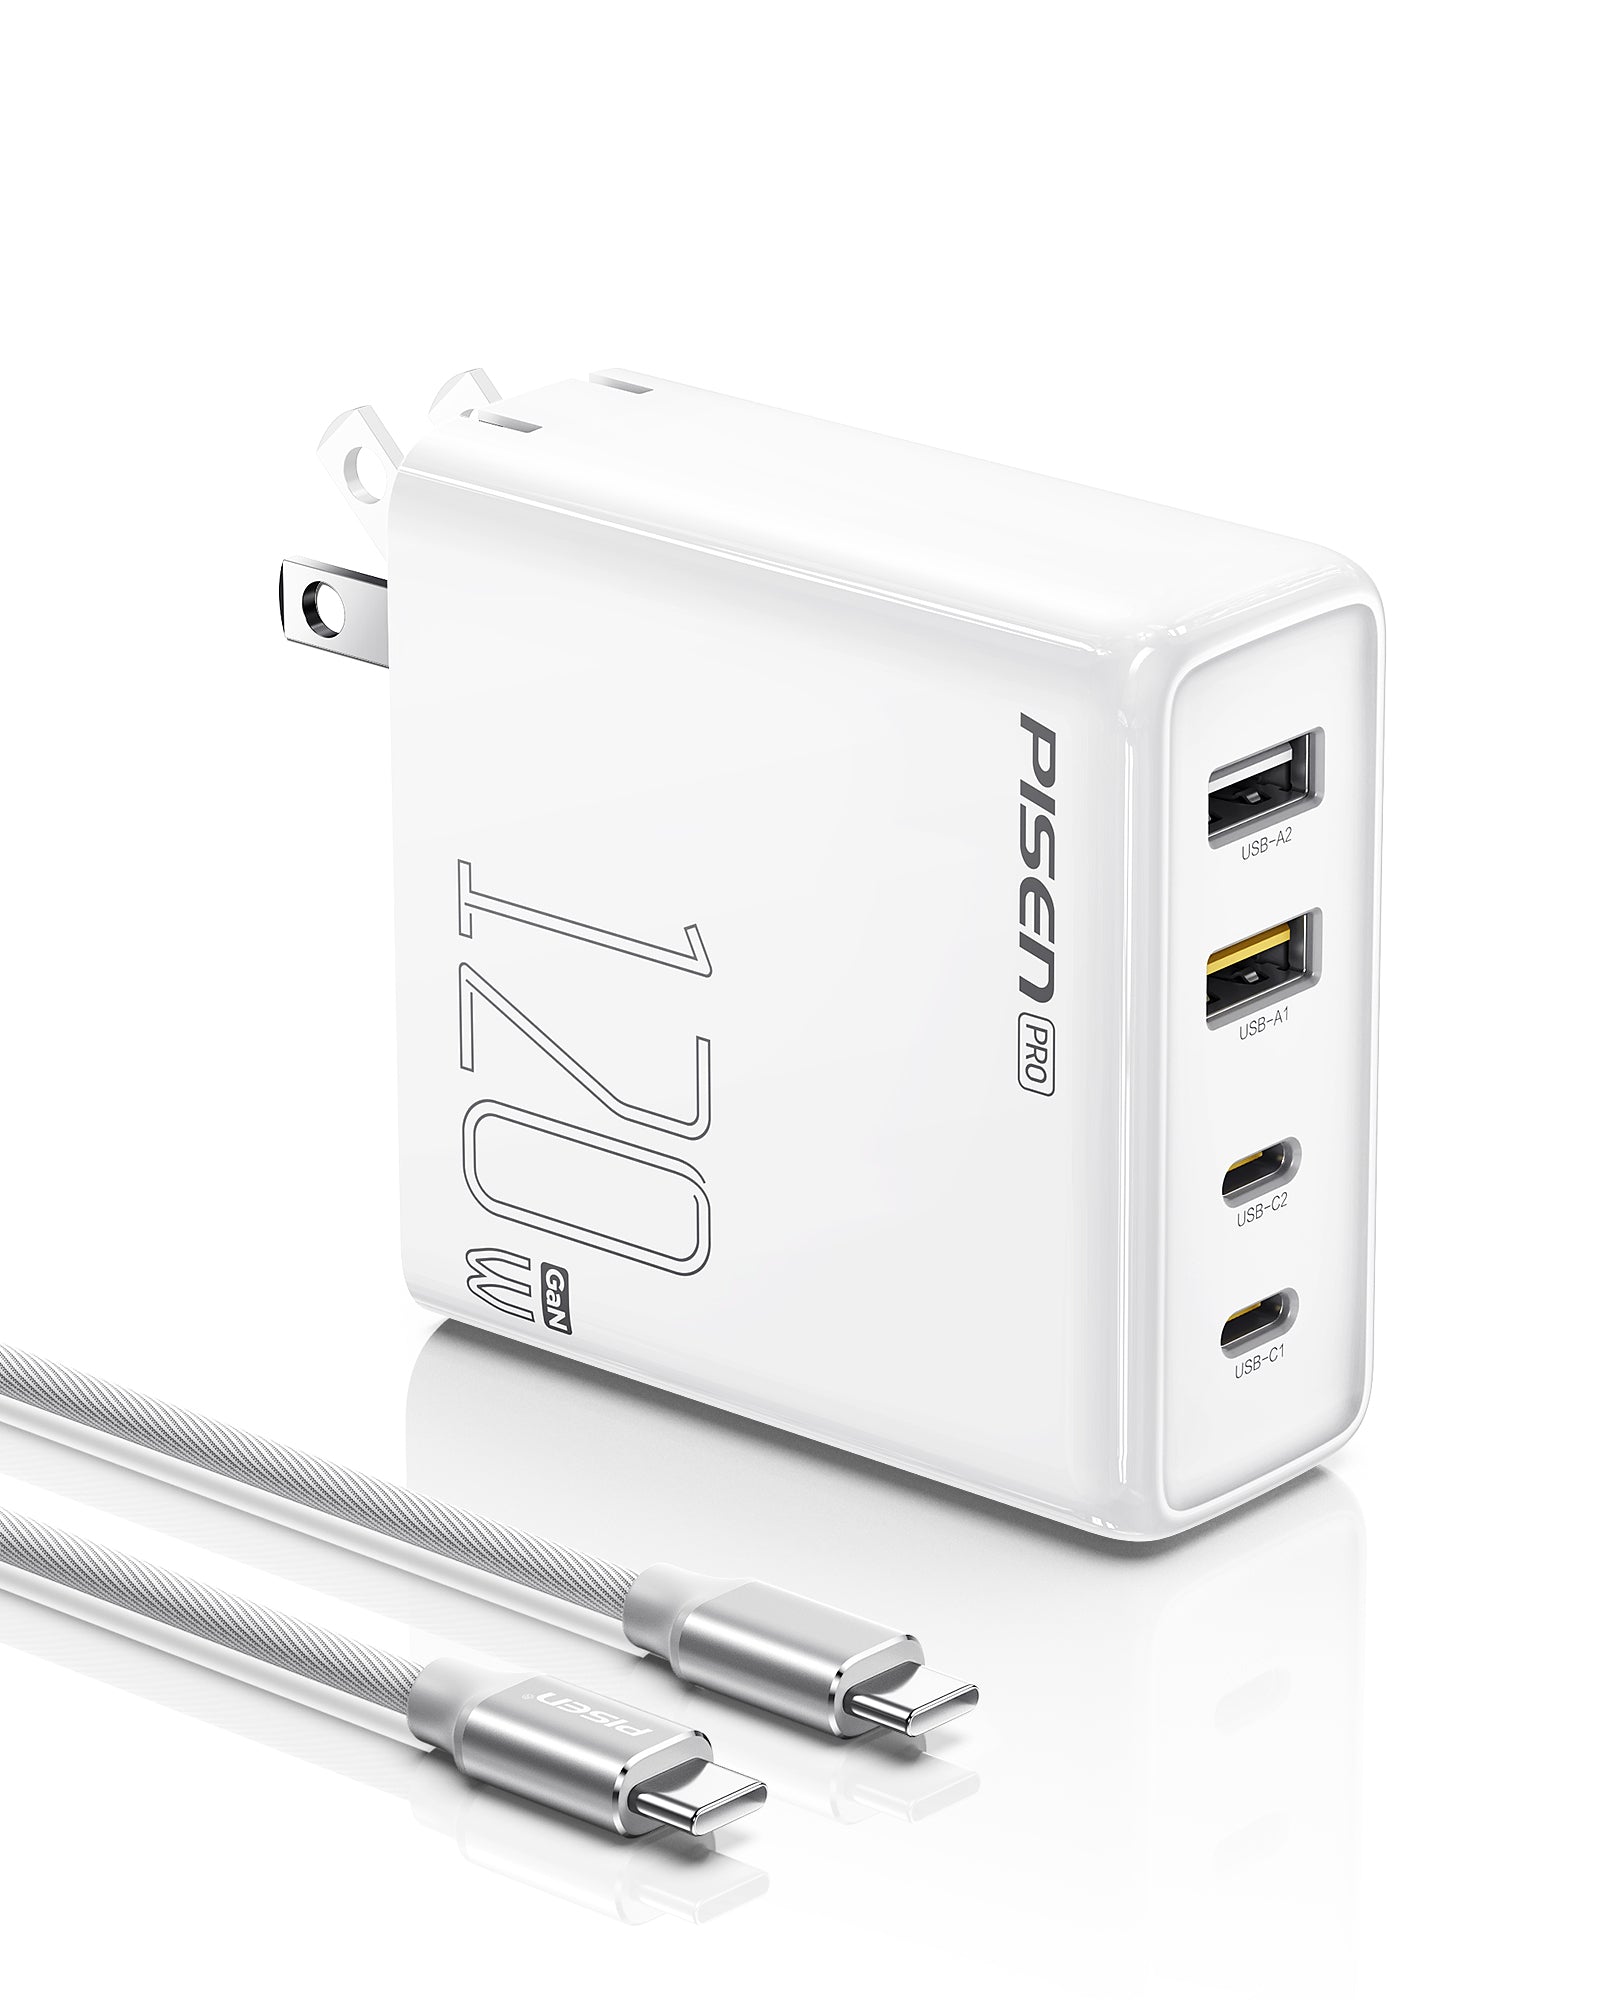 PISEN 120W USB C Charger - PPS 4-Port GaN USB C Charger Block Fast Charging with 6FT USB-C to C Cable for MacBook Pro/Air, Pixelbook, iPad Pro, iPhone Series, Galaxy S23/Note20, Pixel 8, Steam Deck